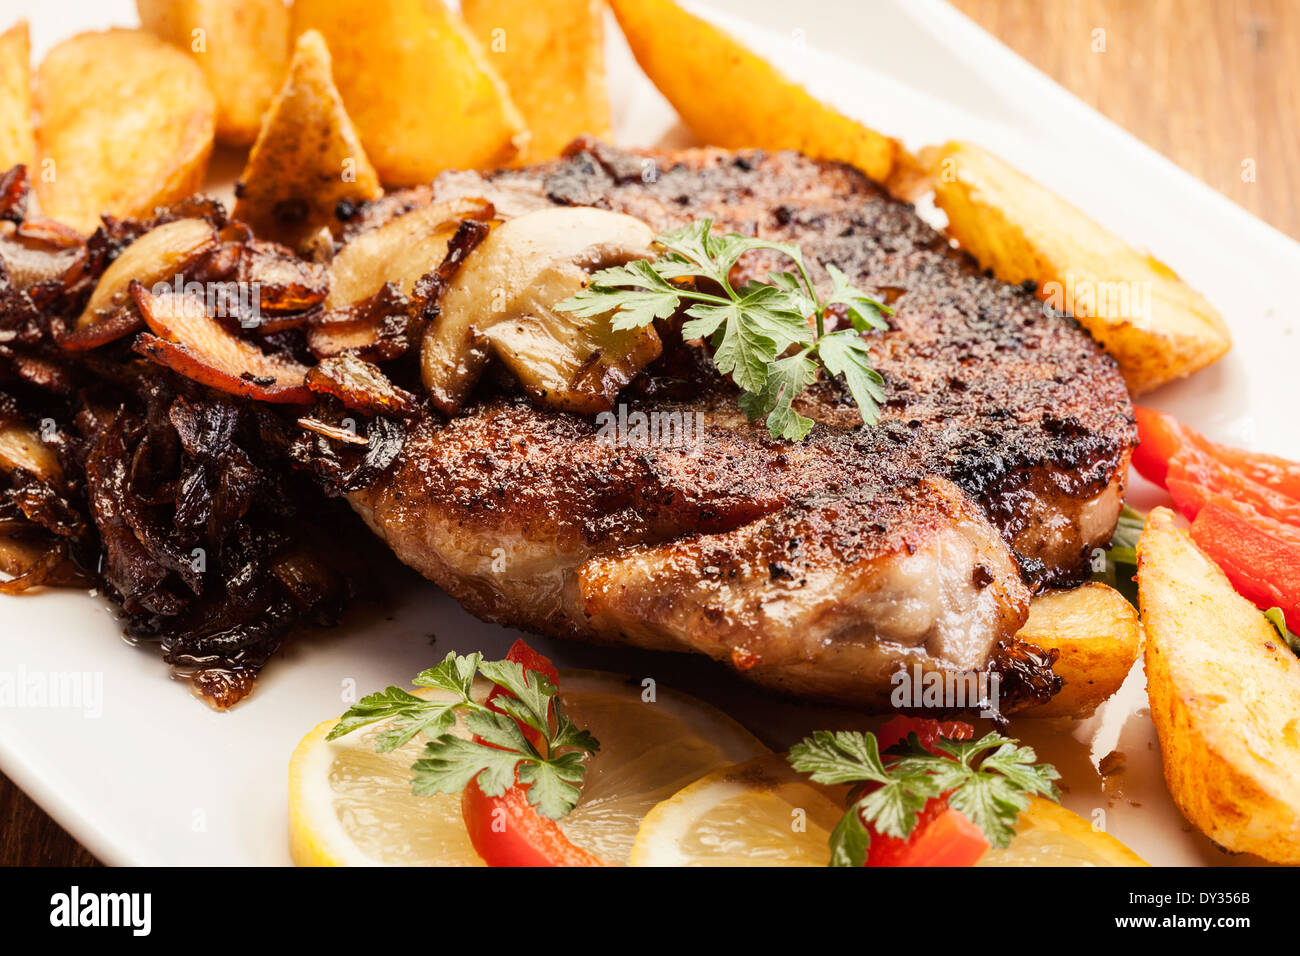 Fried pork chop with mushrooms and chips Stock Photo